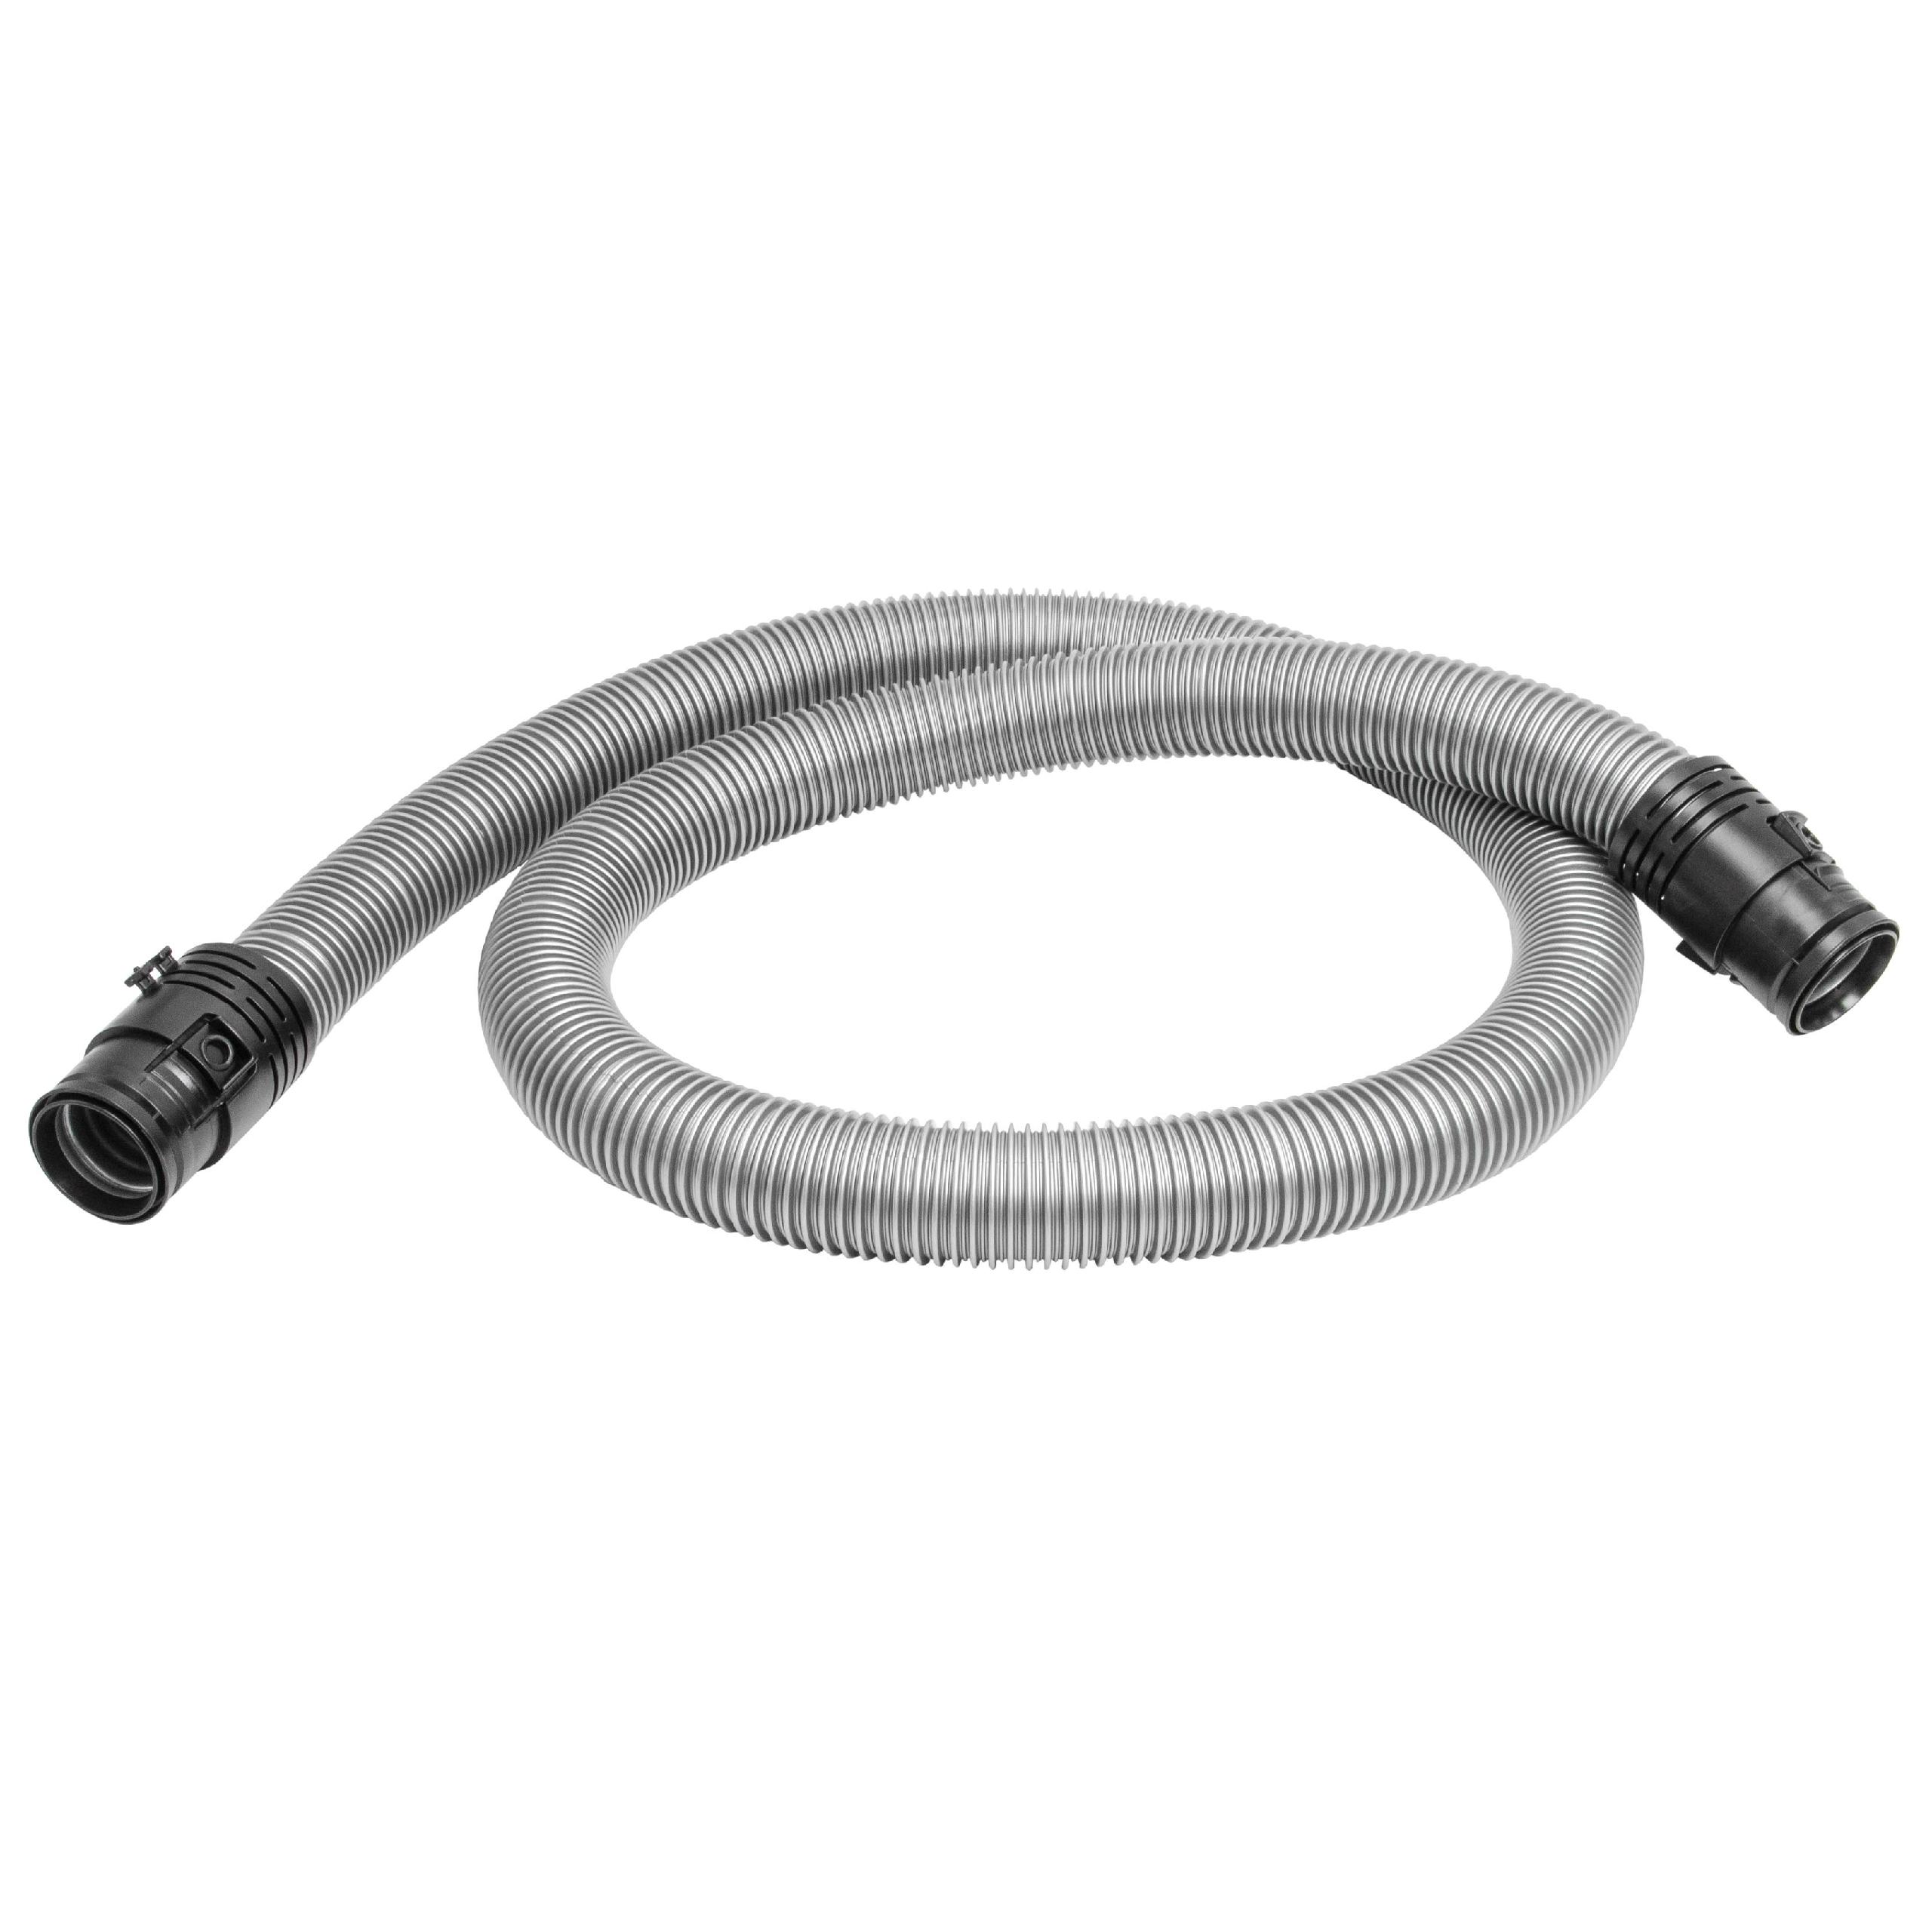 Hose as Replacement for Miele 7736190, 7736191 - 1.8 m long